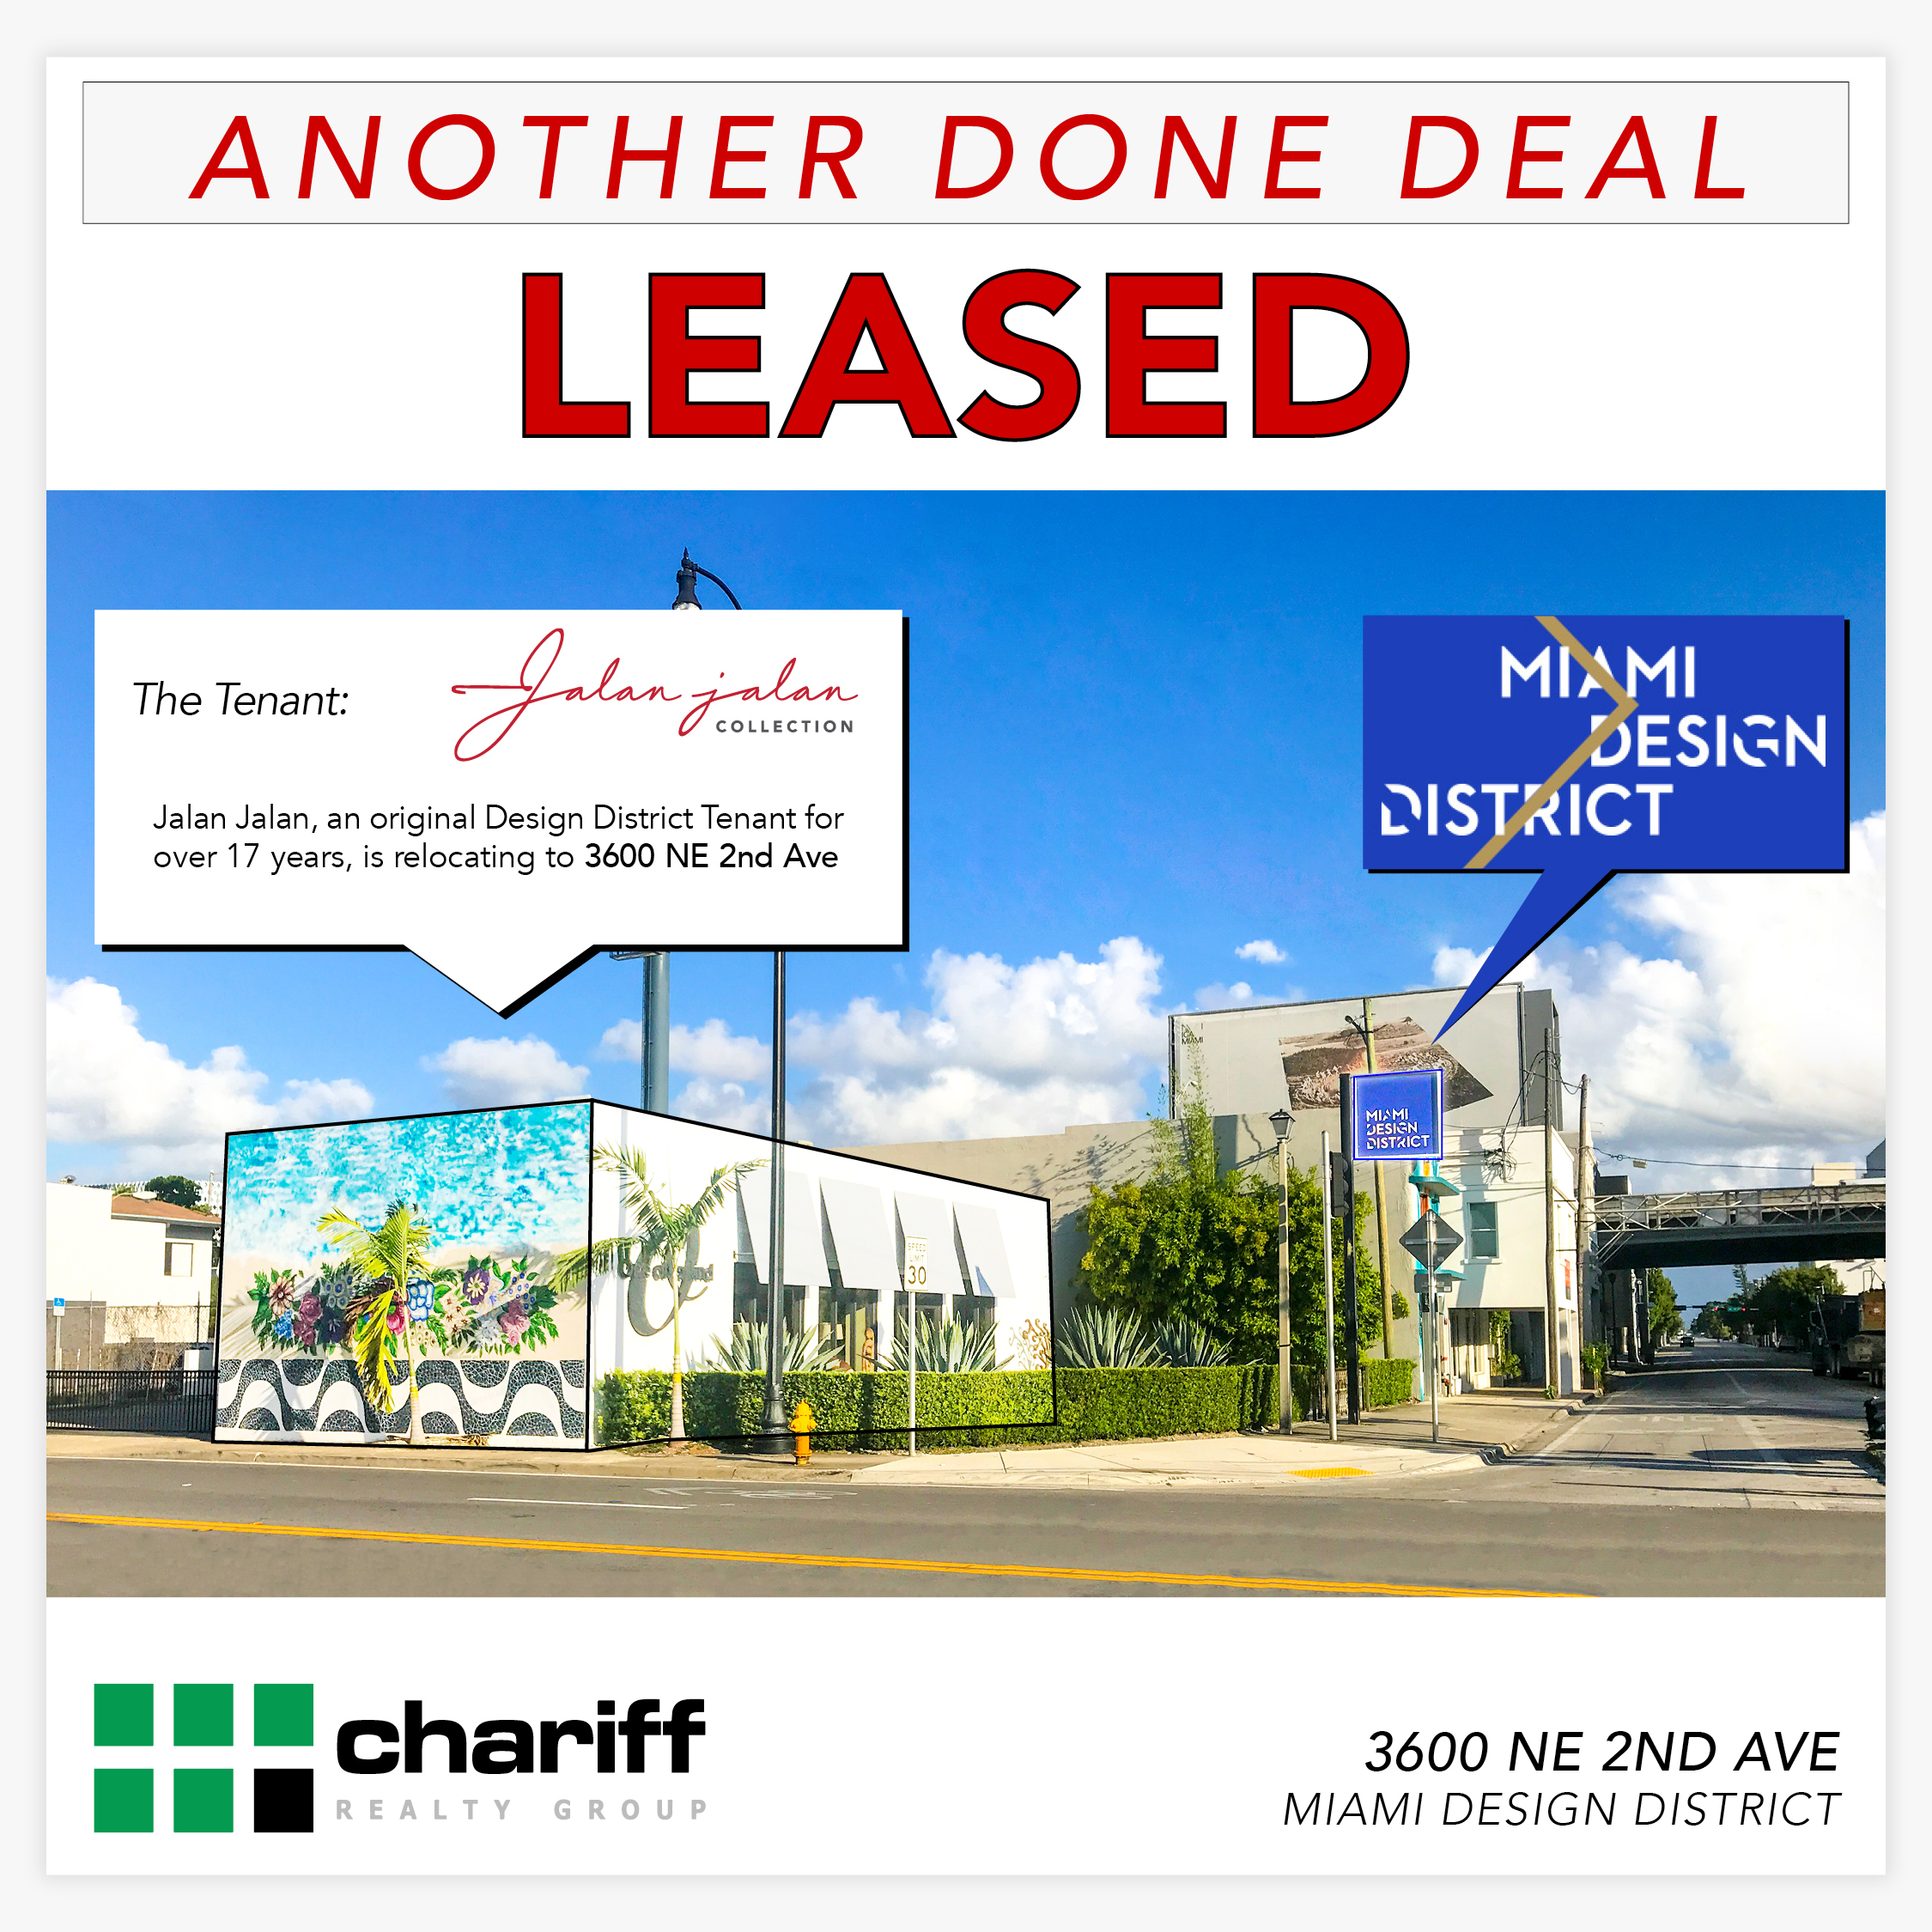 3600 NE 2nd Ave - Another Done Deal - Leased -Miami Design District Miami-Florida-33137-Chariff Realty Group